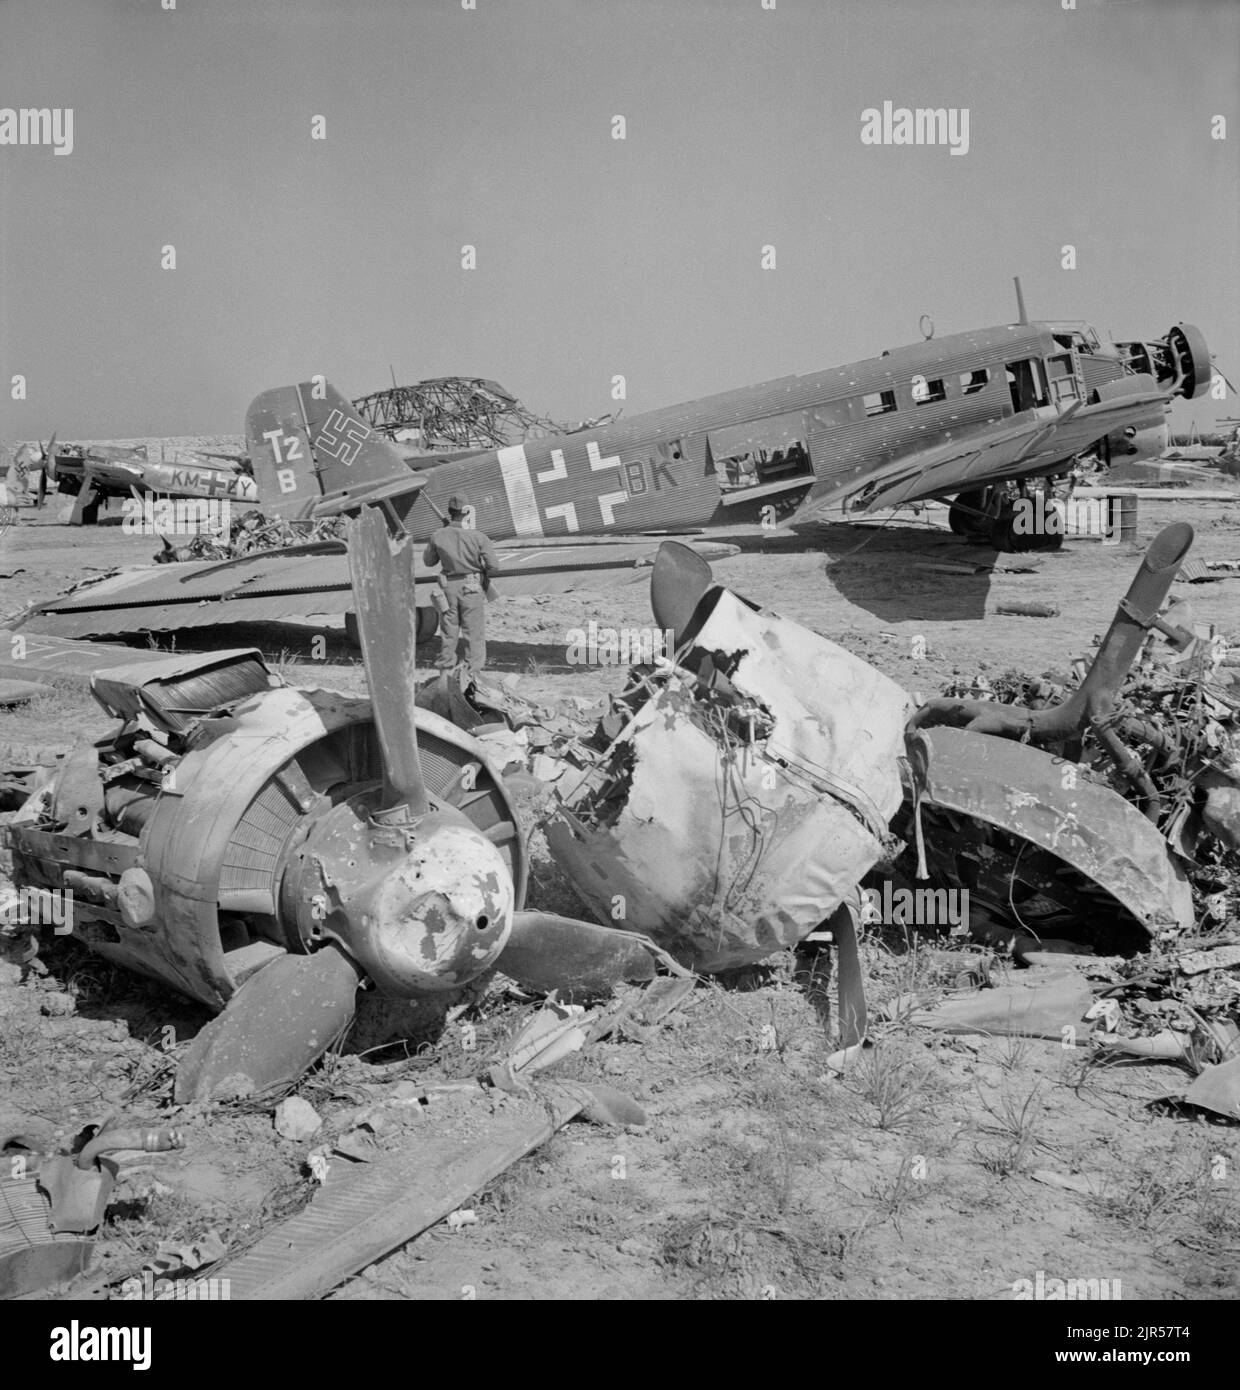 A vintage photo circa May 1943 showing a wrecked German Junkers JU52 transport aircraft at El Aouiana Tunisia after the defeat of the Axis forces in North Africa Stock Photo